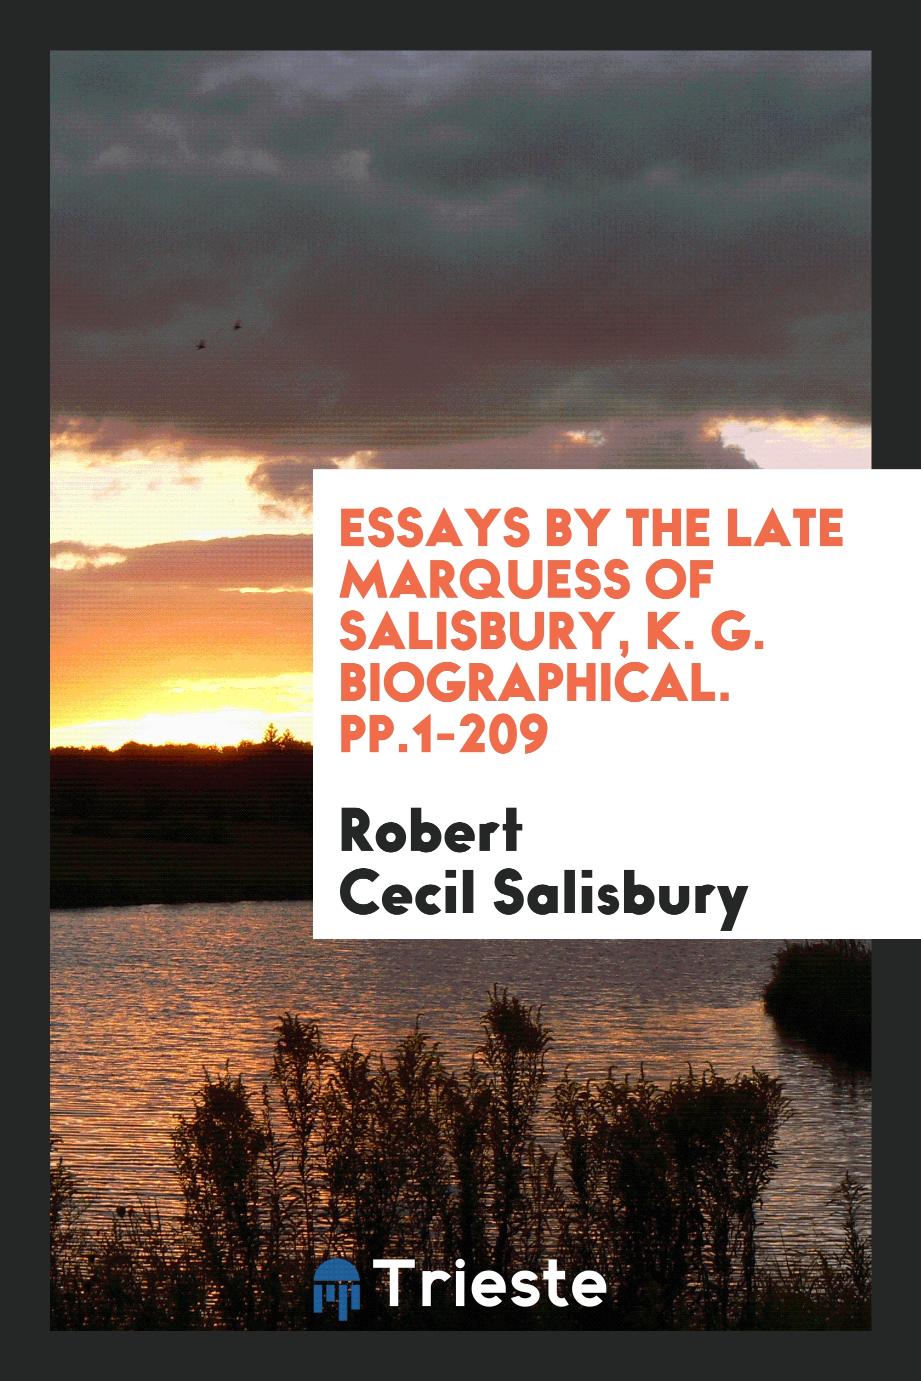 Robert Cecil Salisbury - Essays by the Late Marquess of Salisbury, K. G. Biographical. pp.1-209